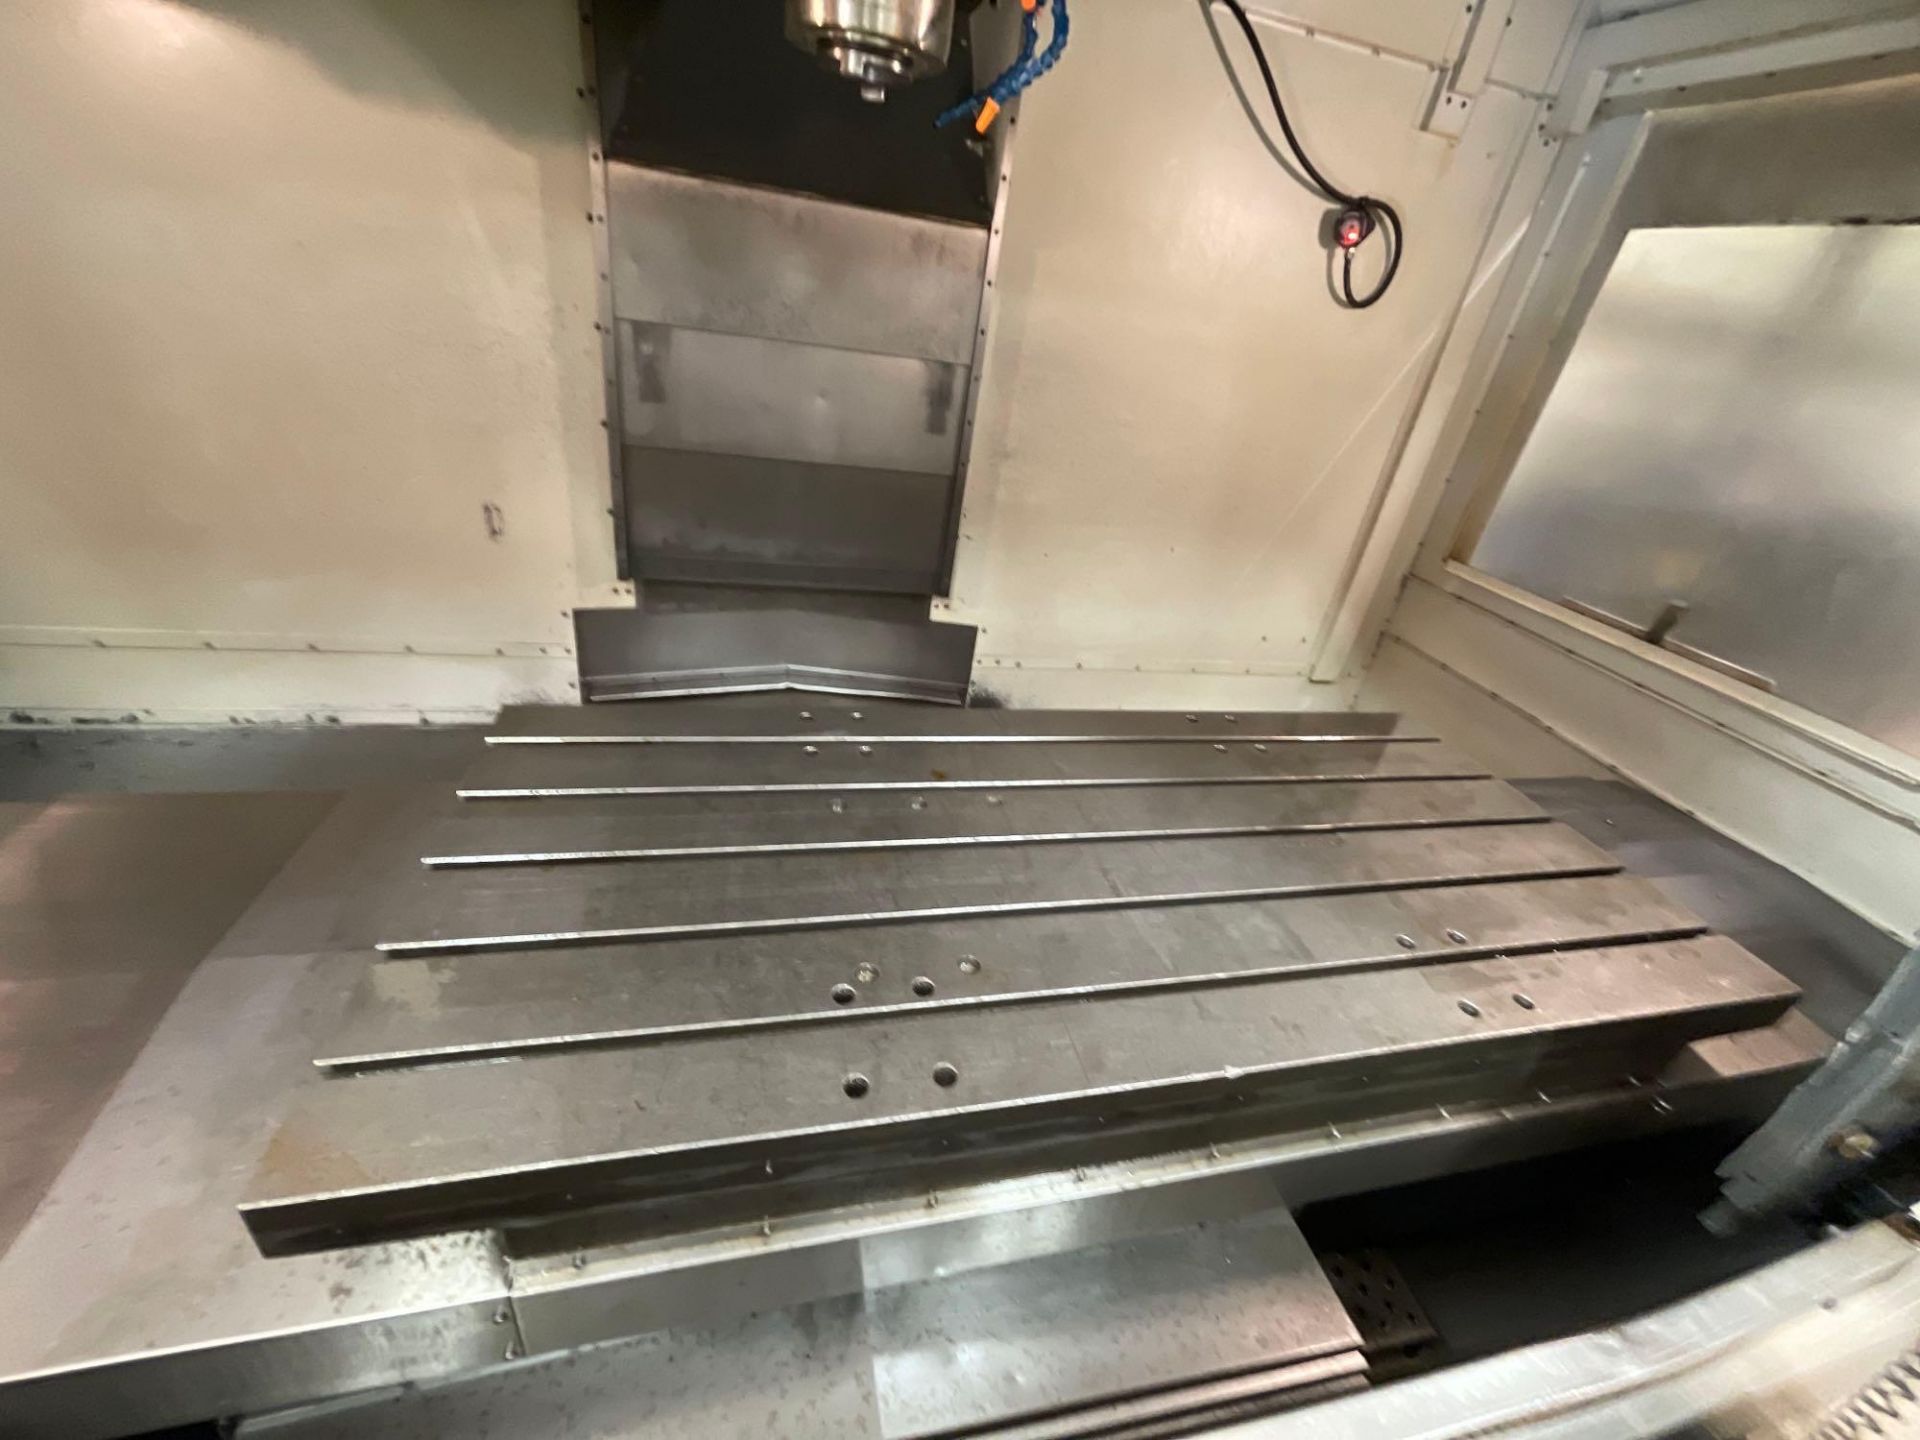 2012, Haas VF-6/50 CNC Vertical Machining Center - Image 29 of 36